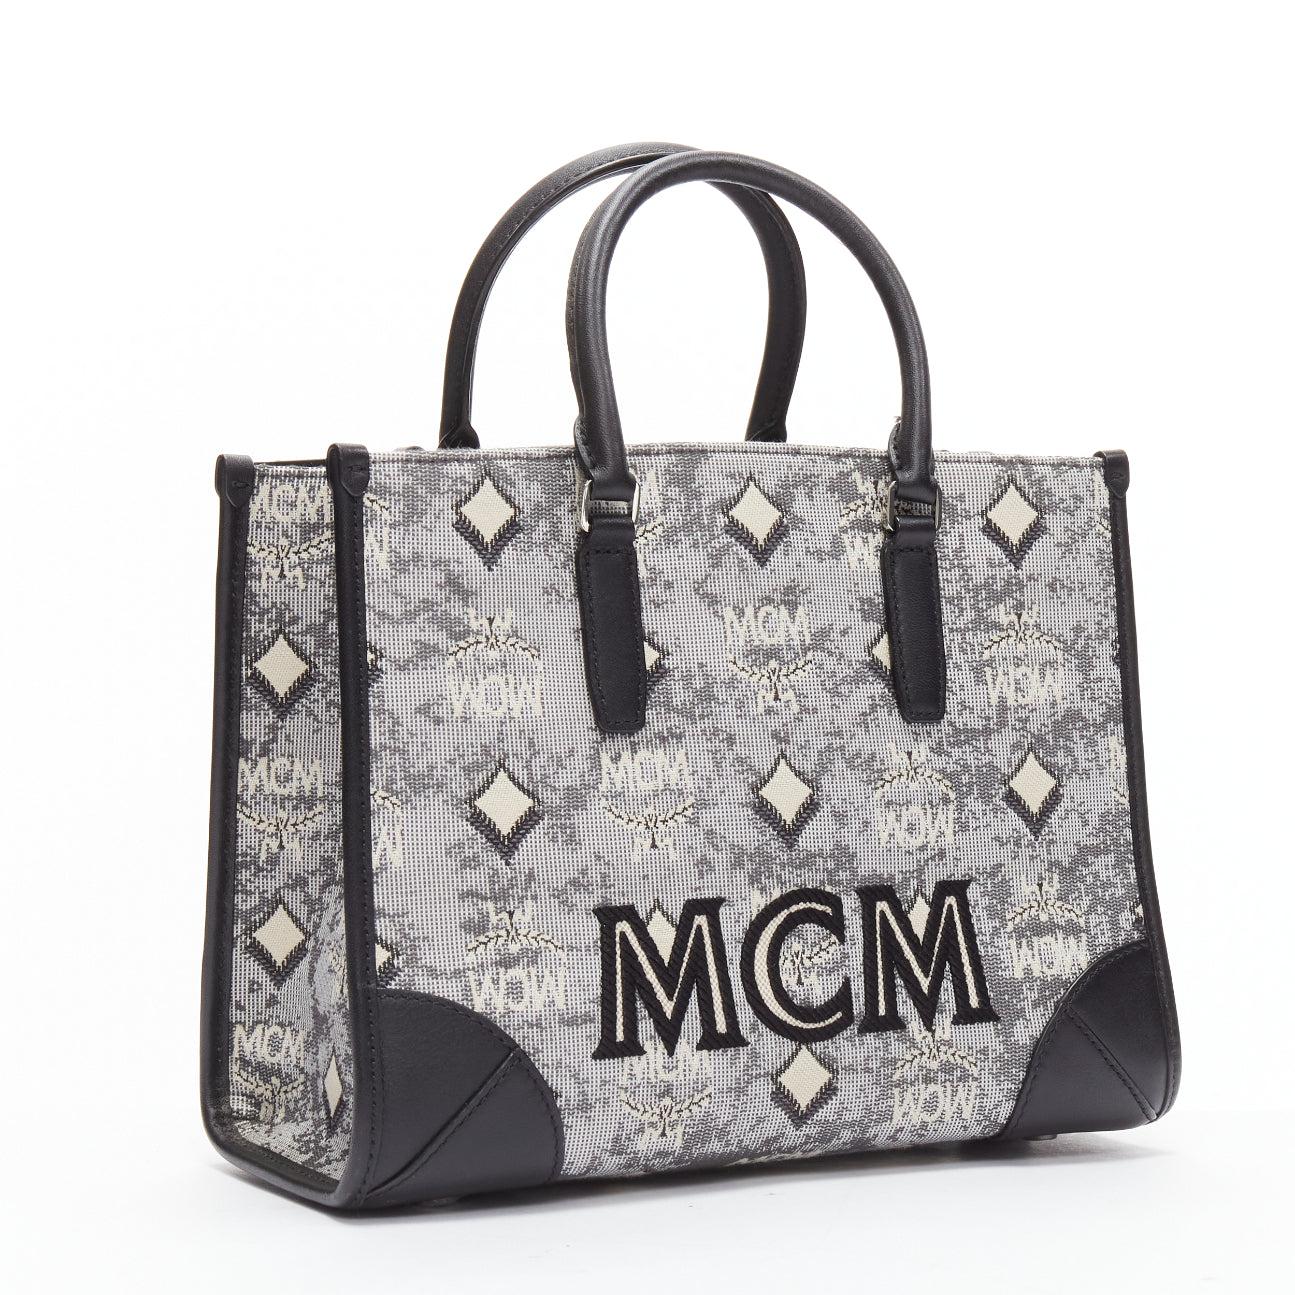 MCM grey vintage logo jacquard canvas embroidery small tote bag
Reference: CAWG/A00303
Brand: MCM
Material: Fabric, Leather
Color: Black, Grey
Pattern: Solid
Closure: Lobster Clasp
Lining: Beige Fabric
Extra Details: Signature monogram. Vintage